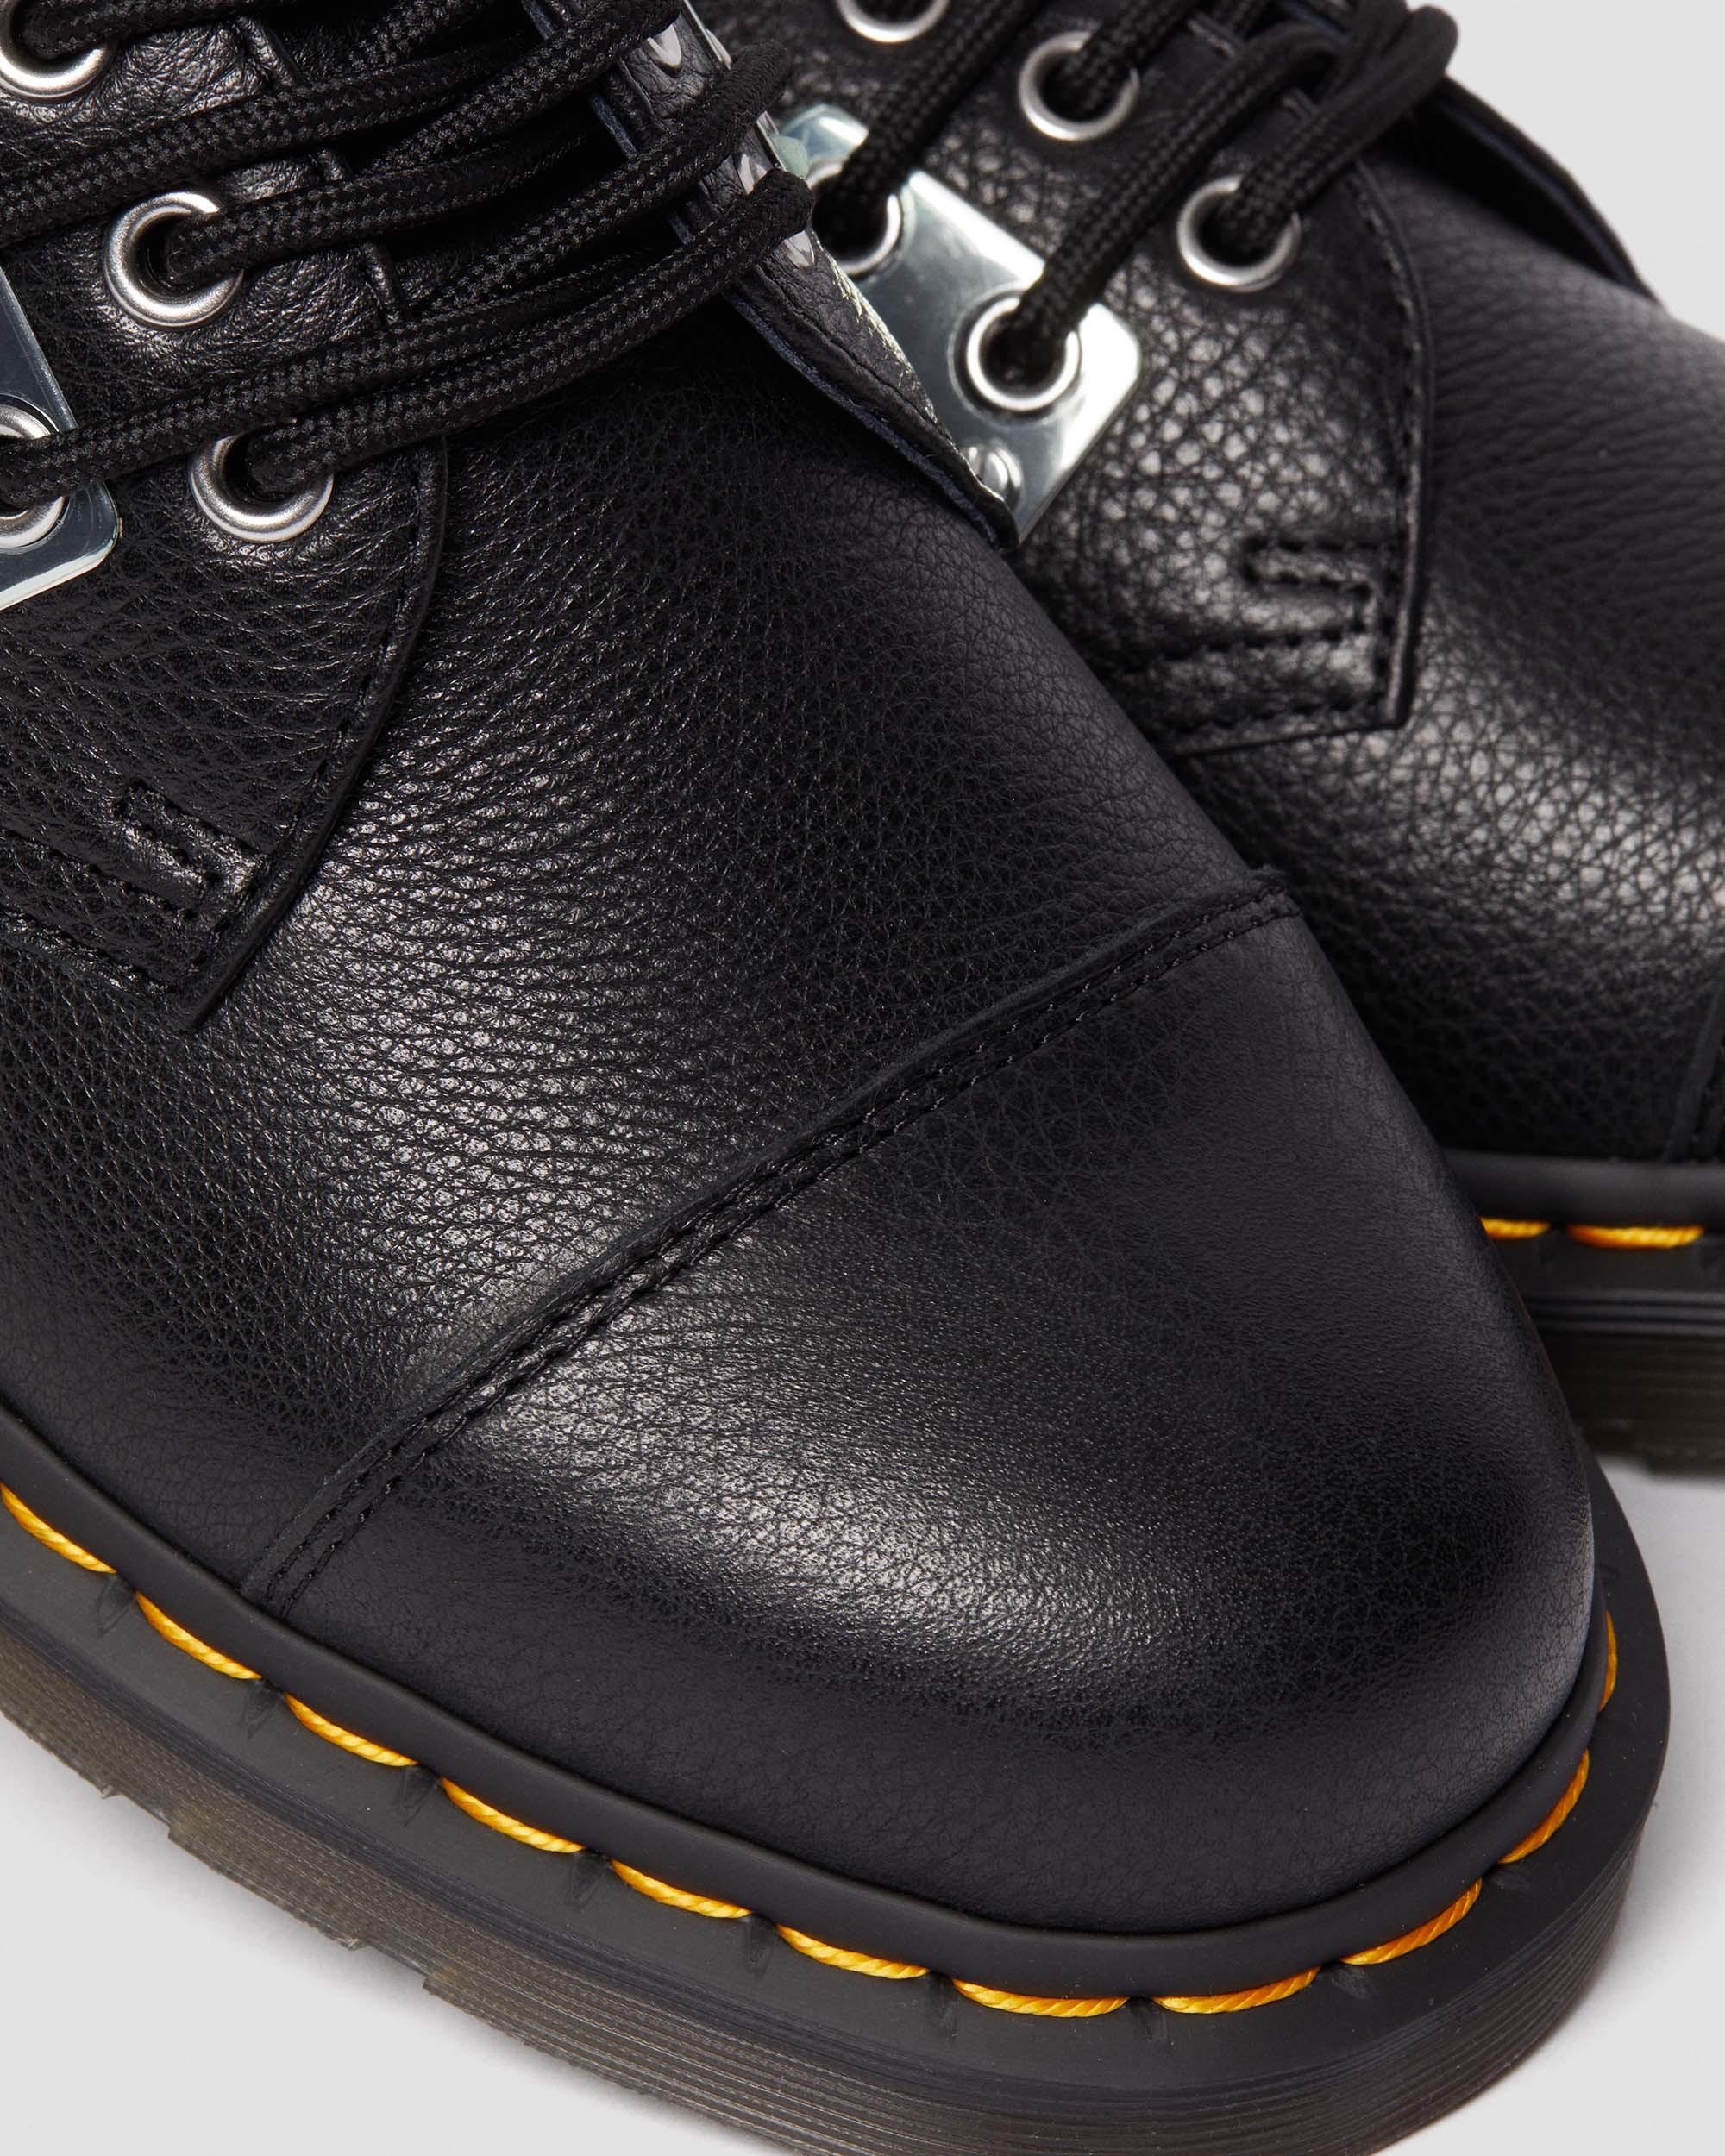 1461 Toe Plate Lunar Leather Oxford Shoes in Black